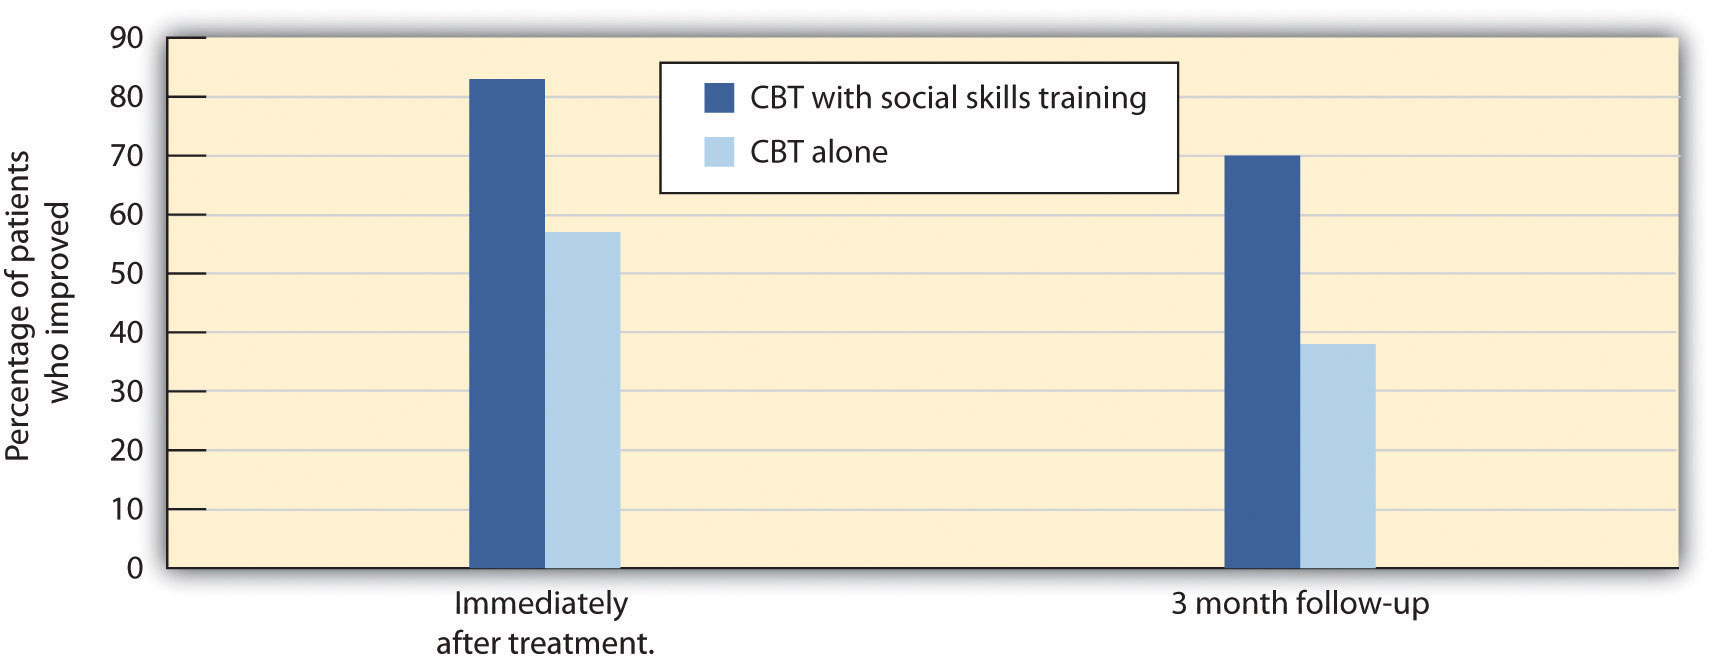 Herbert et al. (2005) compared the effectiveness of CBT alone with CBT along with social skills training. Both groups improved, but the group that received both therapies had significantly greater gains than the group that received CBT alone.